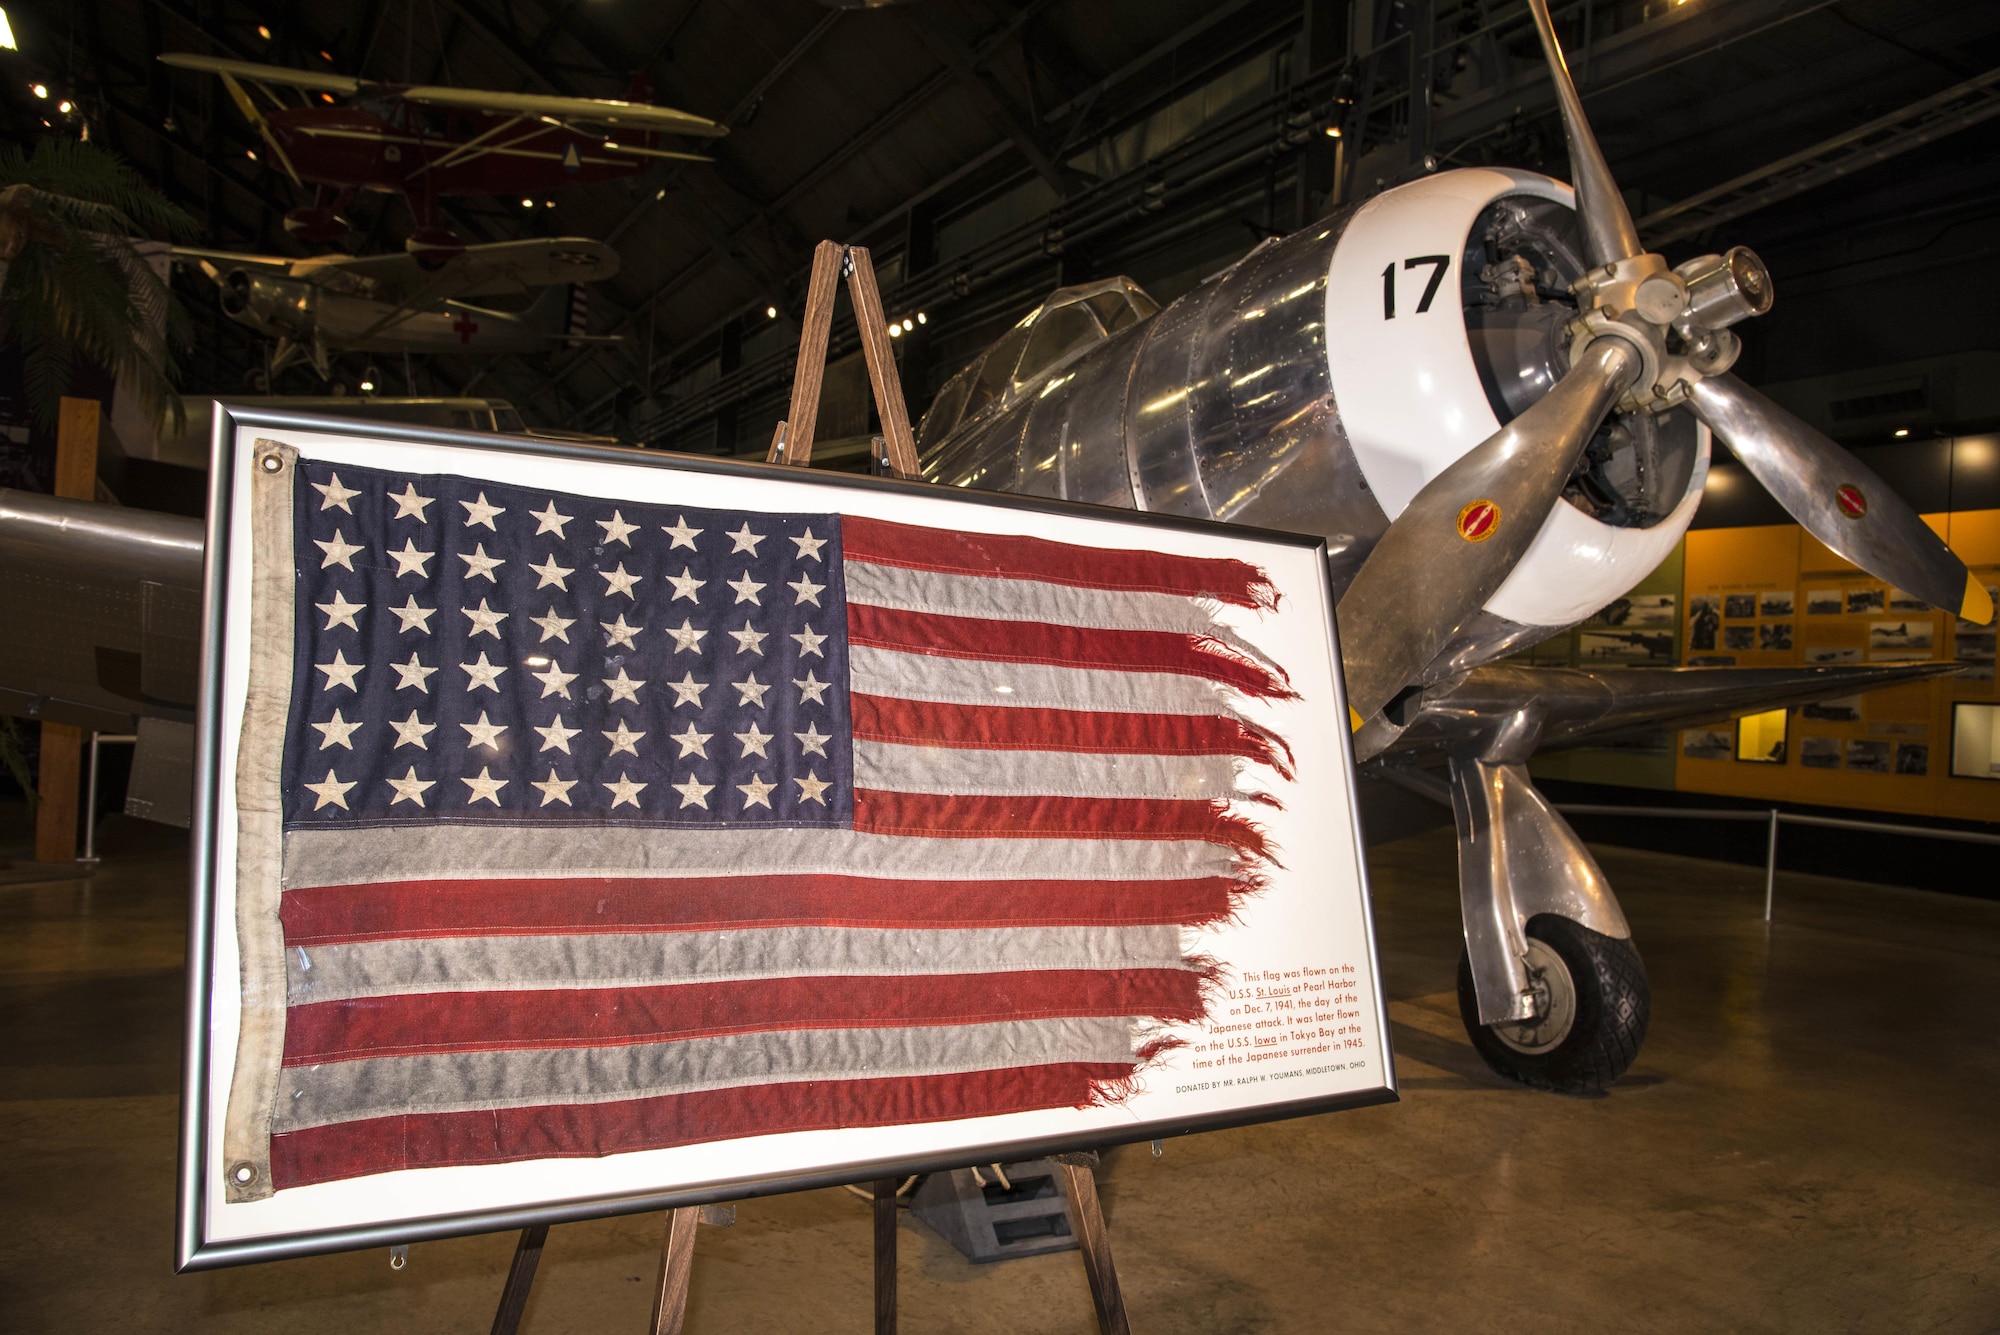 DAYTON, Ohio - This flag was flown on the U.S.S. St. Louis at Pearl Harbor on Dec. 7, 1941, the day of the Japanese attack. It was later flown on the U.S.S. Iowa in Tokyo Bay at the time of the Japanese surrender in 1945. The flag was donated by Mr. Ralph W. Youmans from Middletown, Ohio. The U.S. flag on display has been temporarily removed for conservation treatment. (U.S. Air Force photo by Ken LaRock)